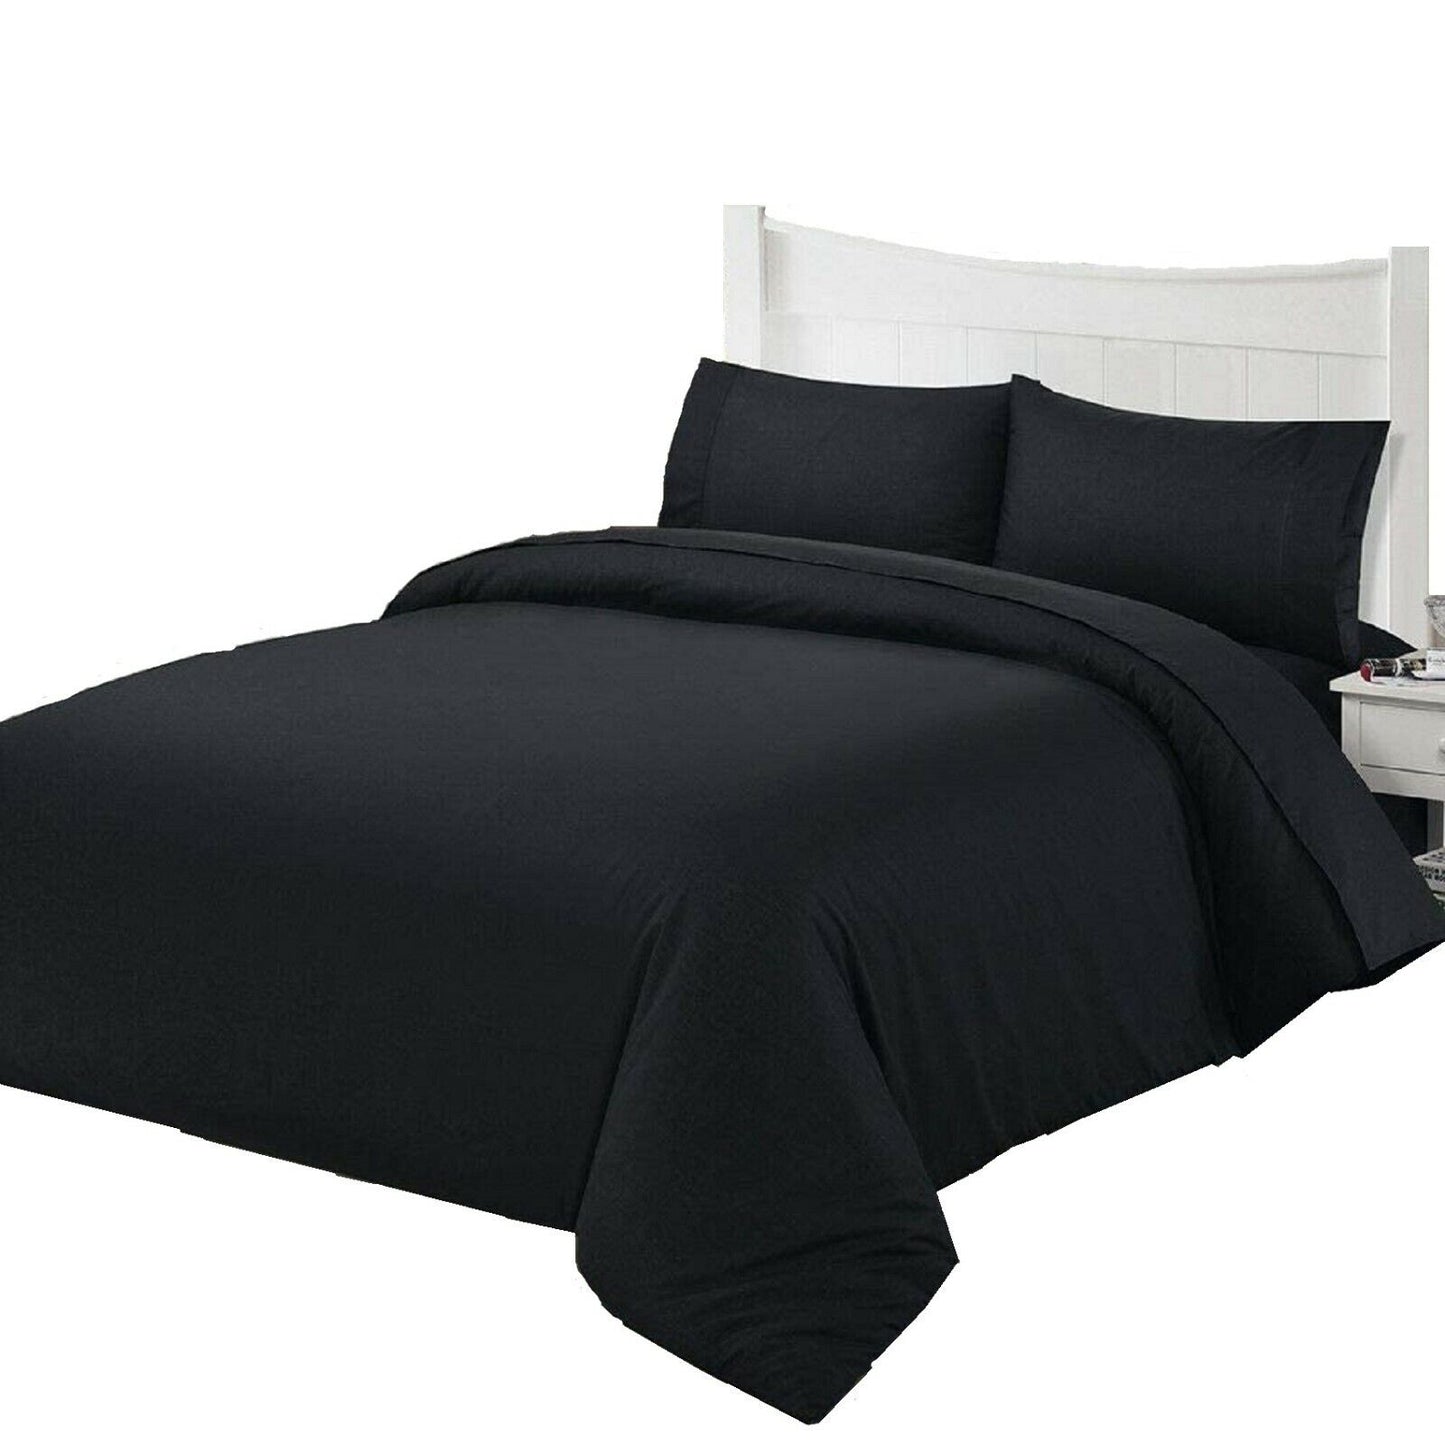 Brushed Microfiber Bedding Set Extra Soft Quilt Cover+Pillow Case+Bed Sheet